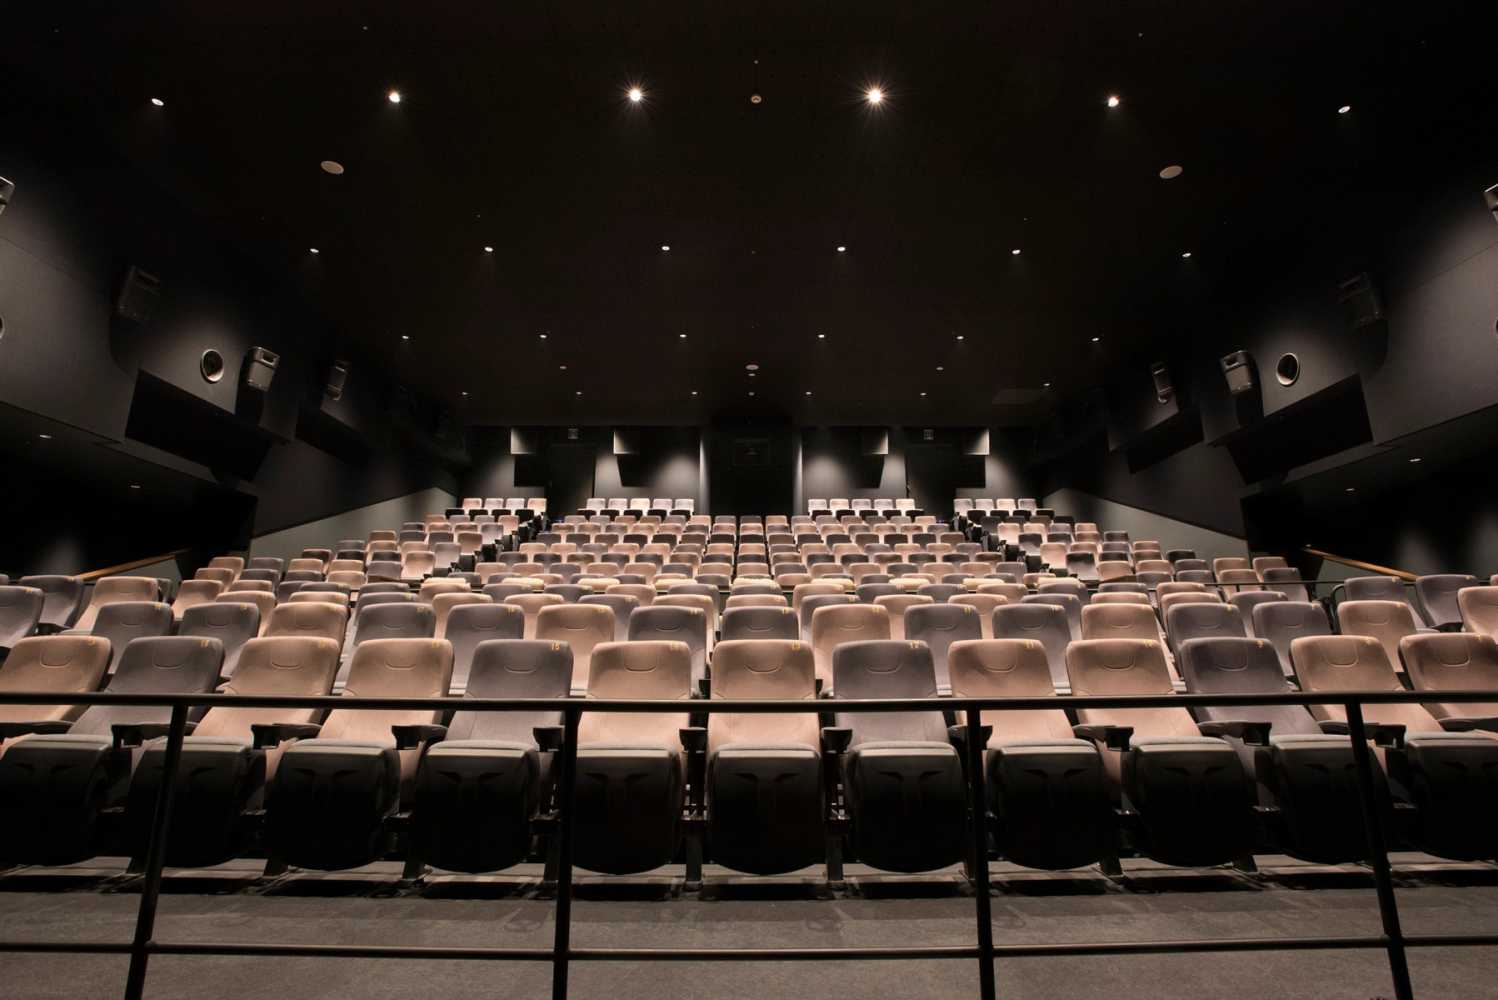 Humax Cinema is one of the most versatile movie complexes in Japan